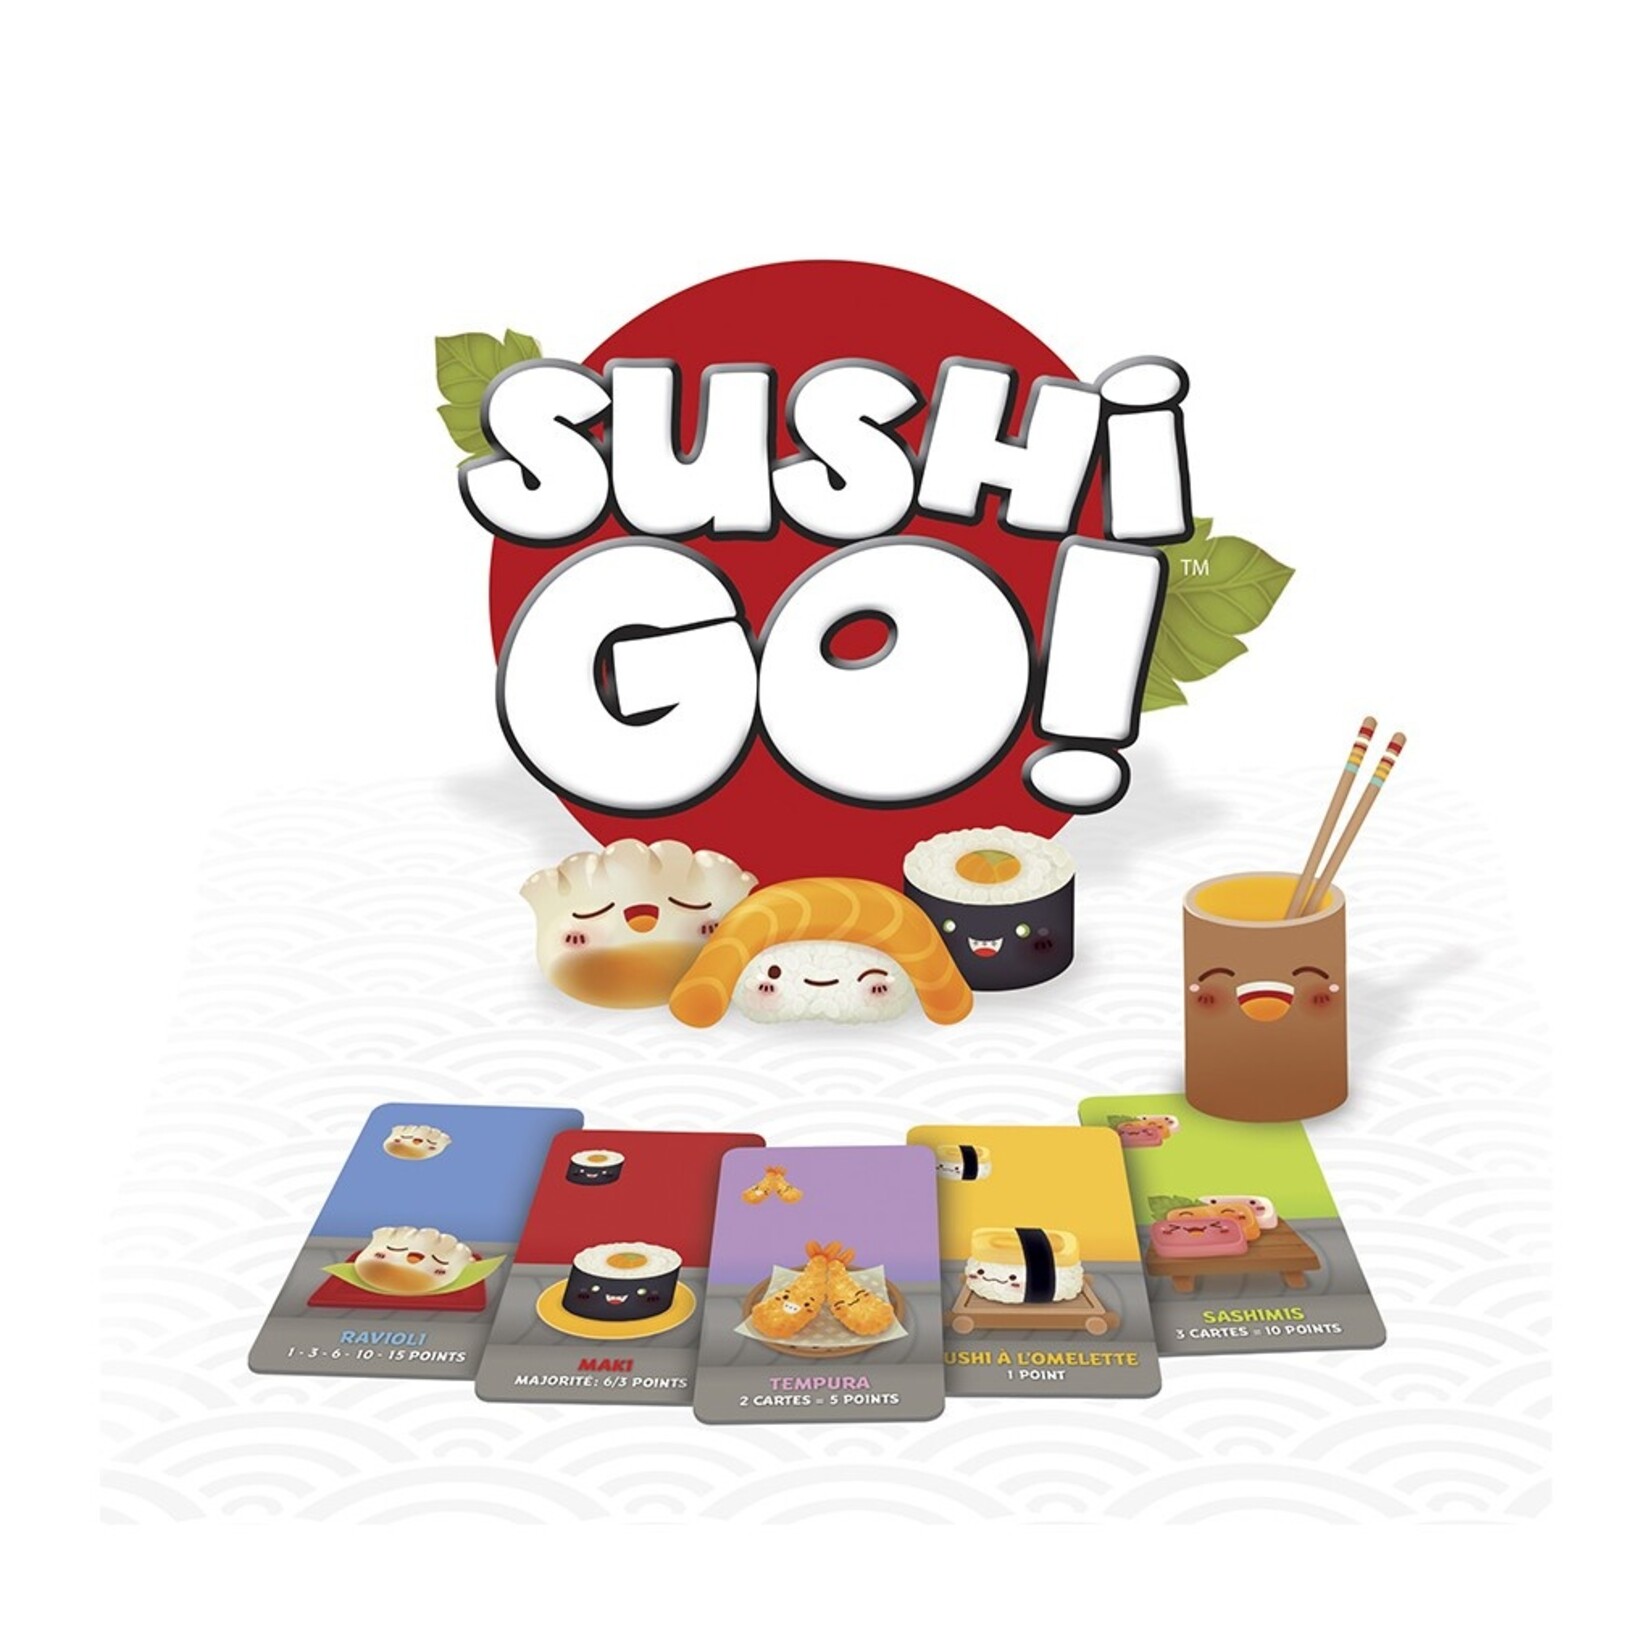 Cocktail Games Sushi Go!